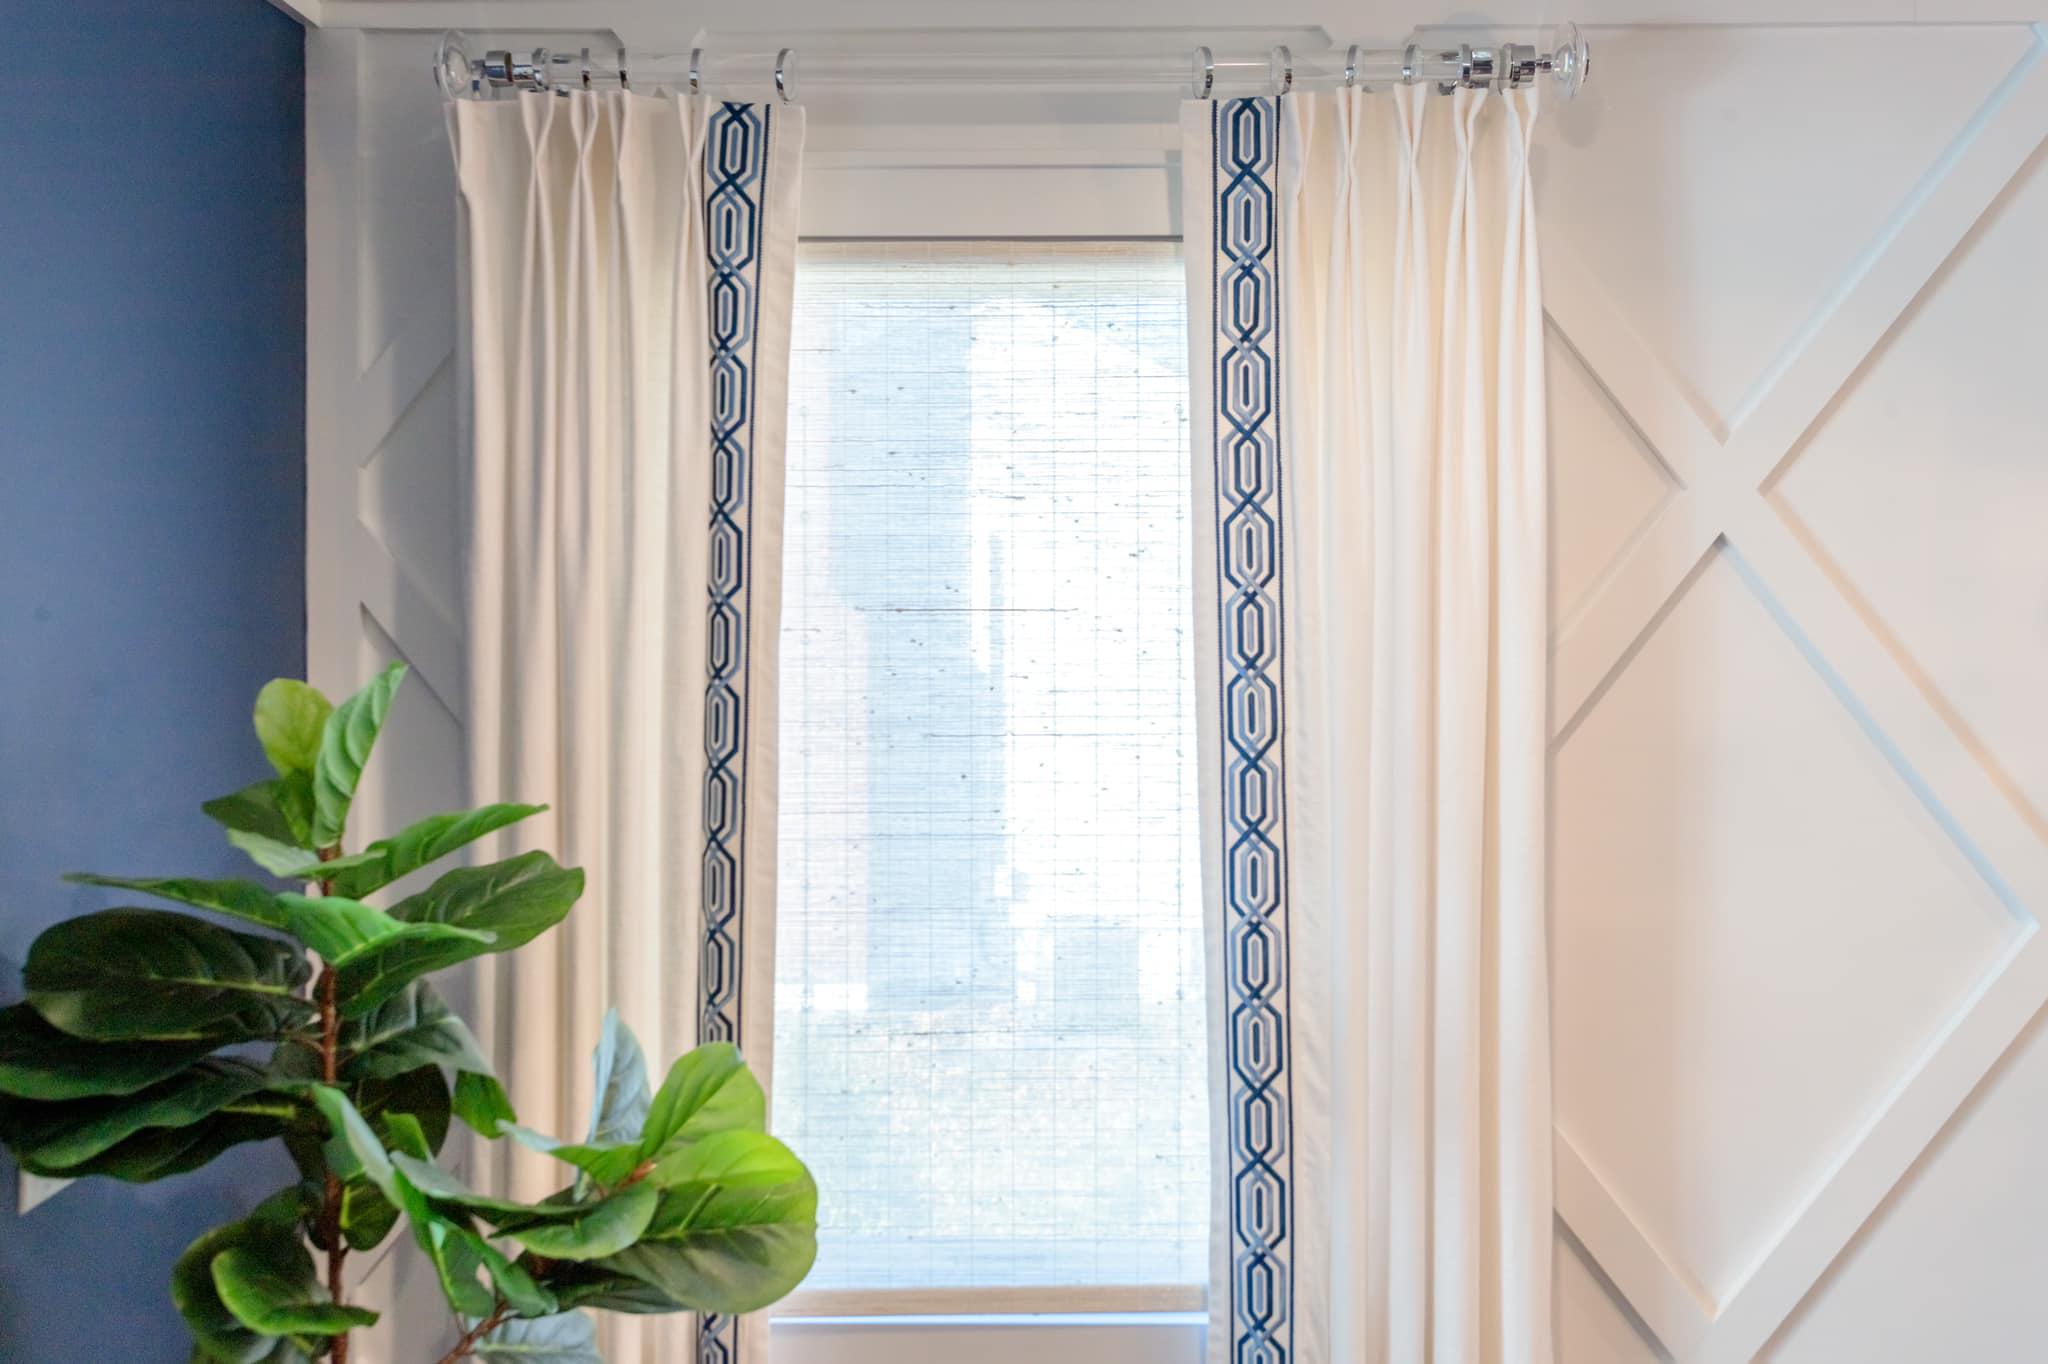 We love this simple white linen drape with navy tape & you can never go wrong with acrylic hardware.